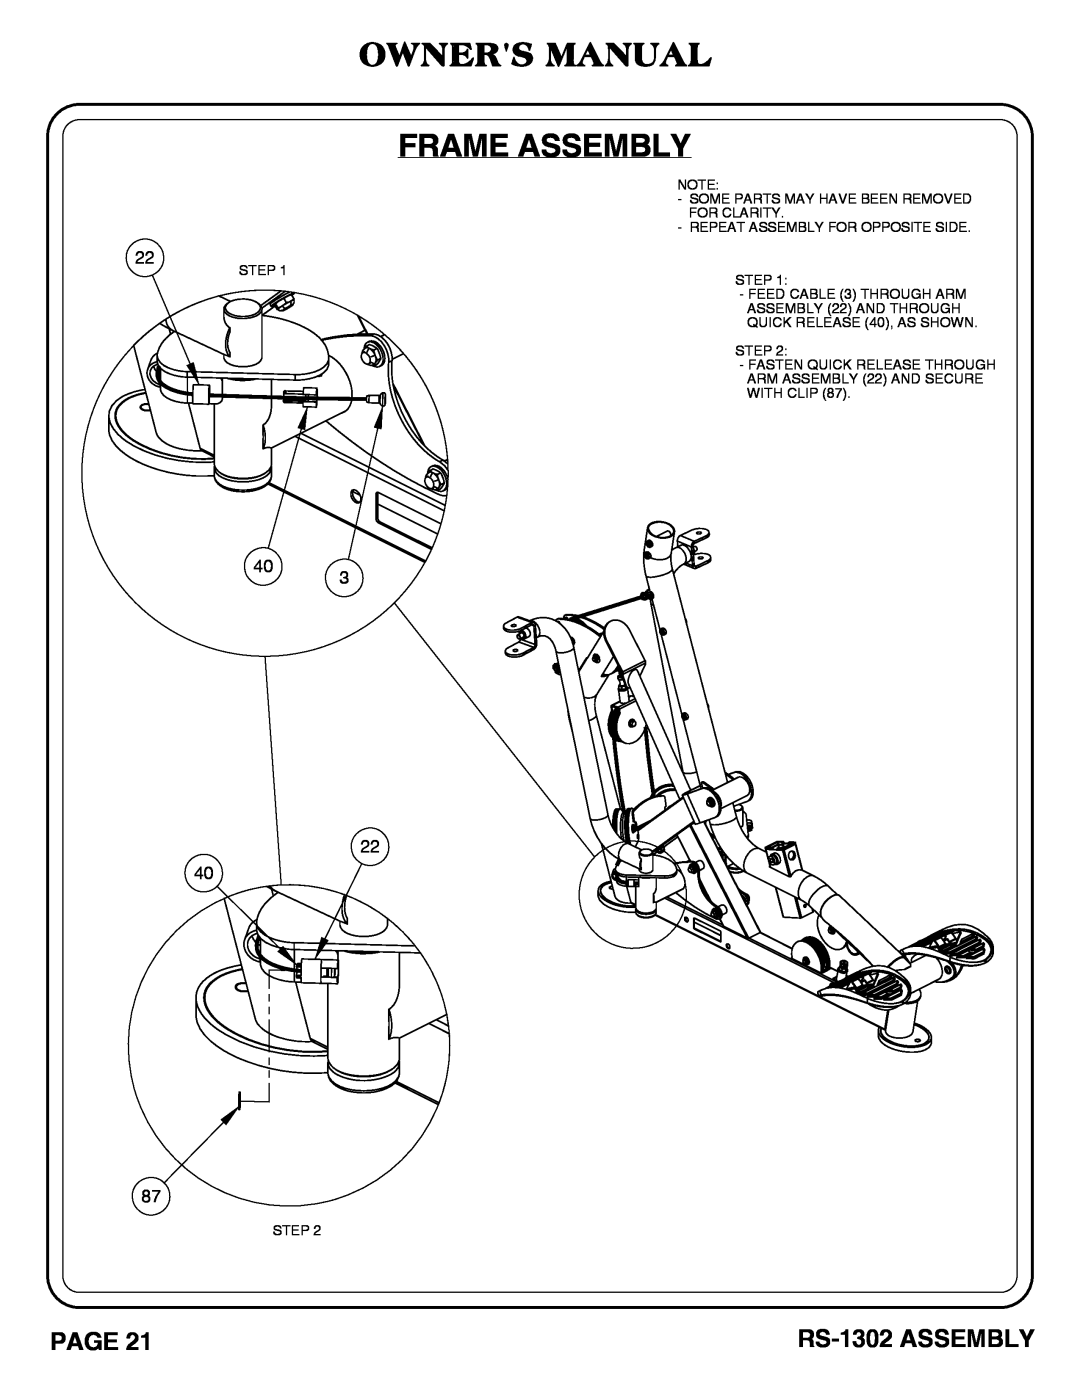 Hoist Fitness Owners Manual Frame Assembly, RS-1302 ASSEMBLY, Some Parts May Have Been Removed For Clarity, Step 